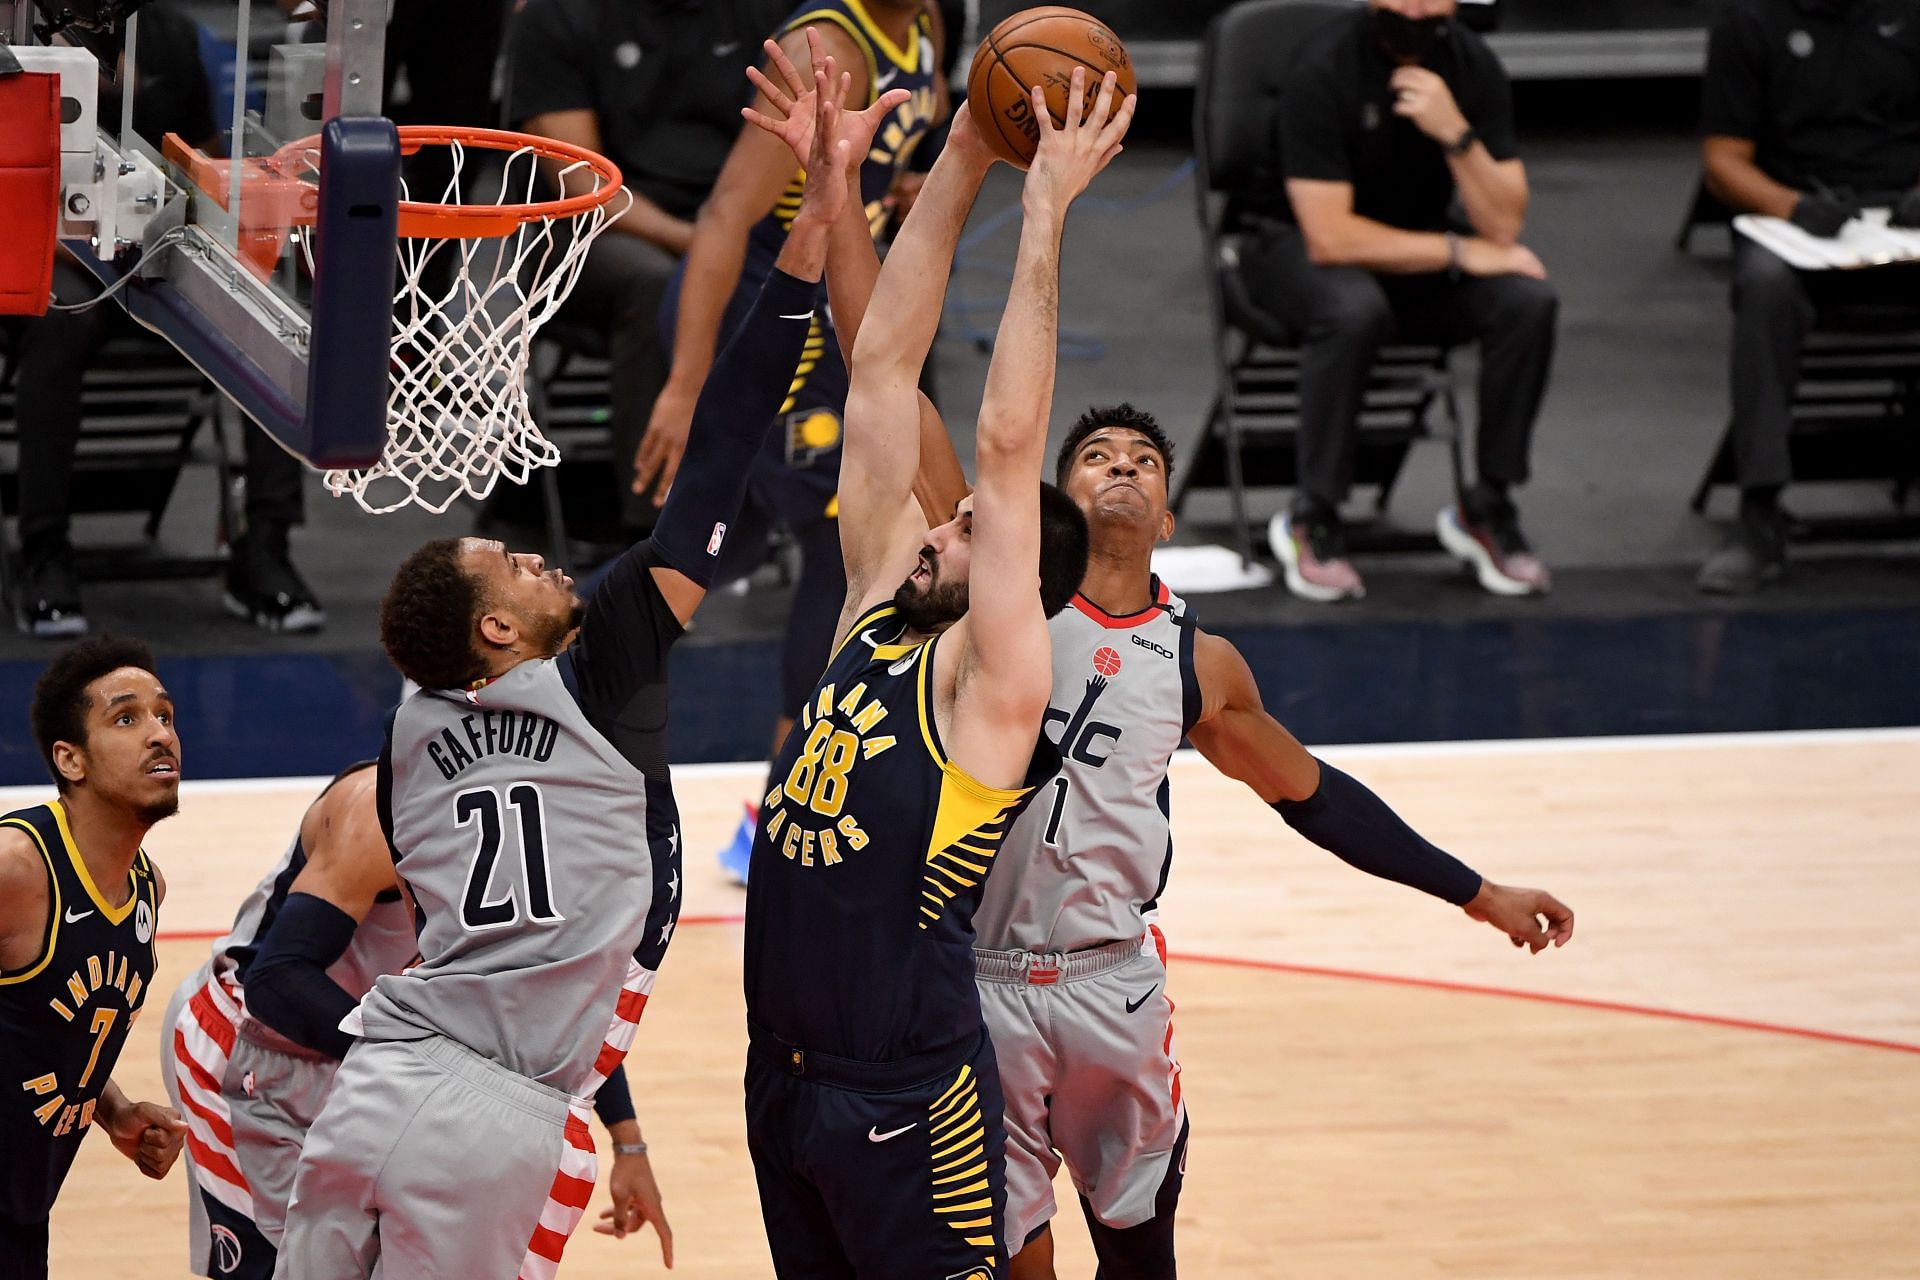 Indiana Pacers vs Washington Wizards - Play-In Tournament